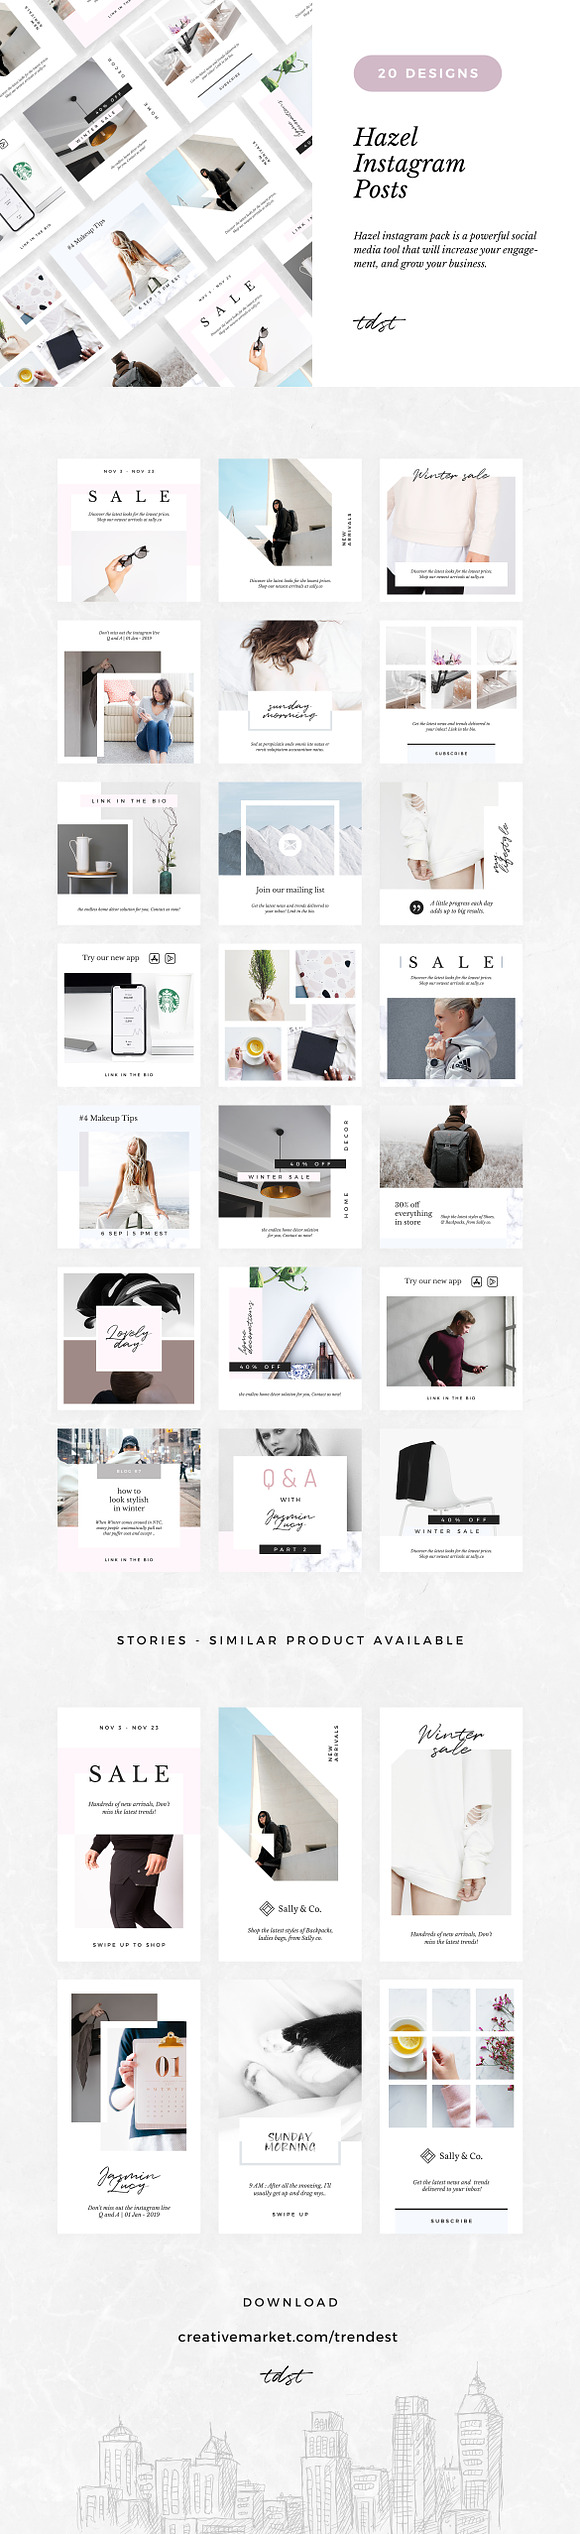 Hazel Social Media Pack in Instagram Templates - product preview 7